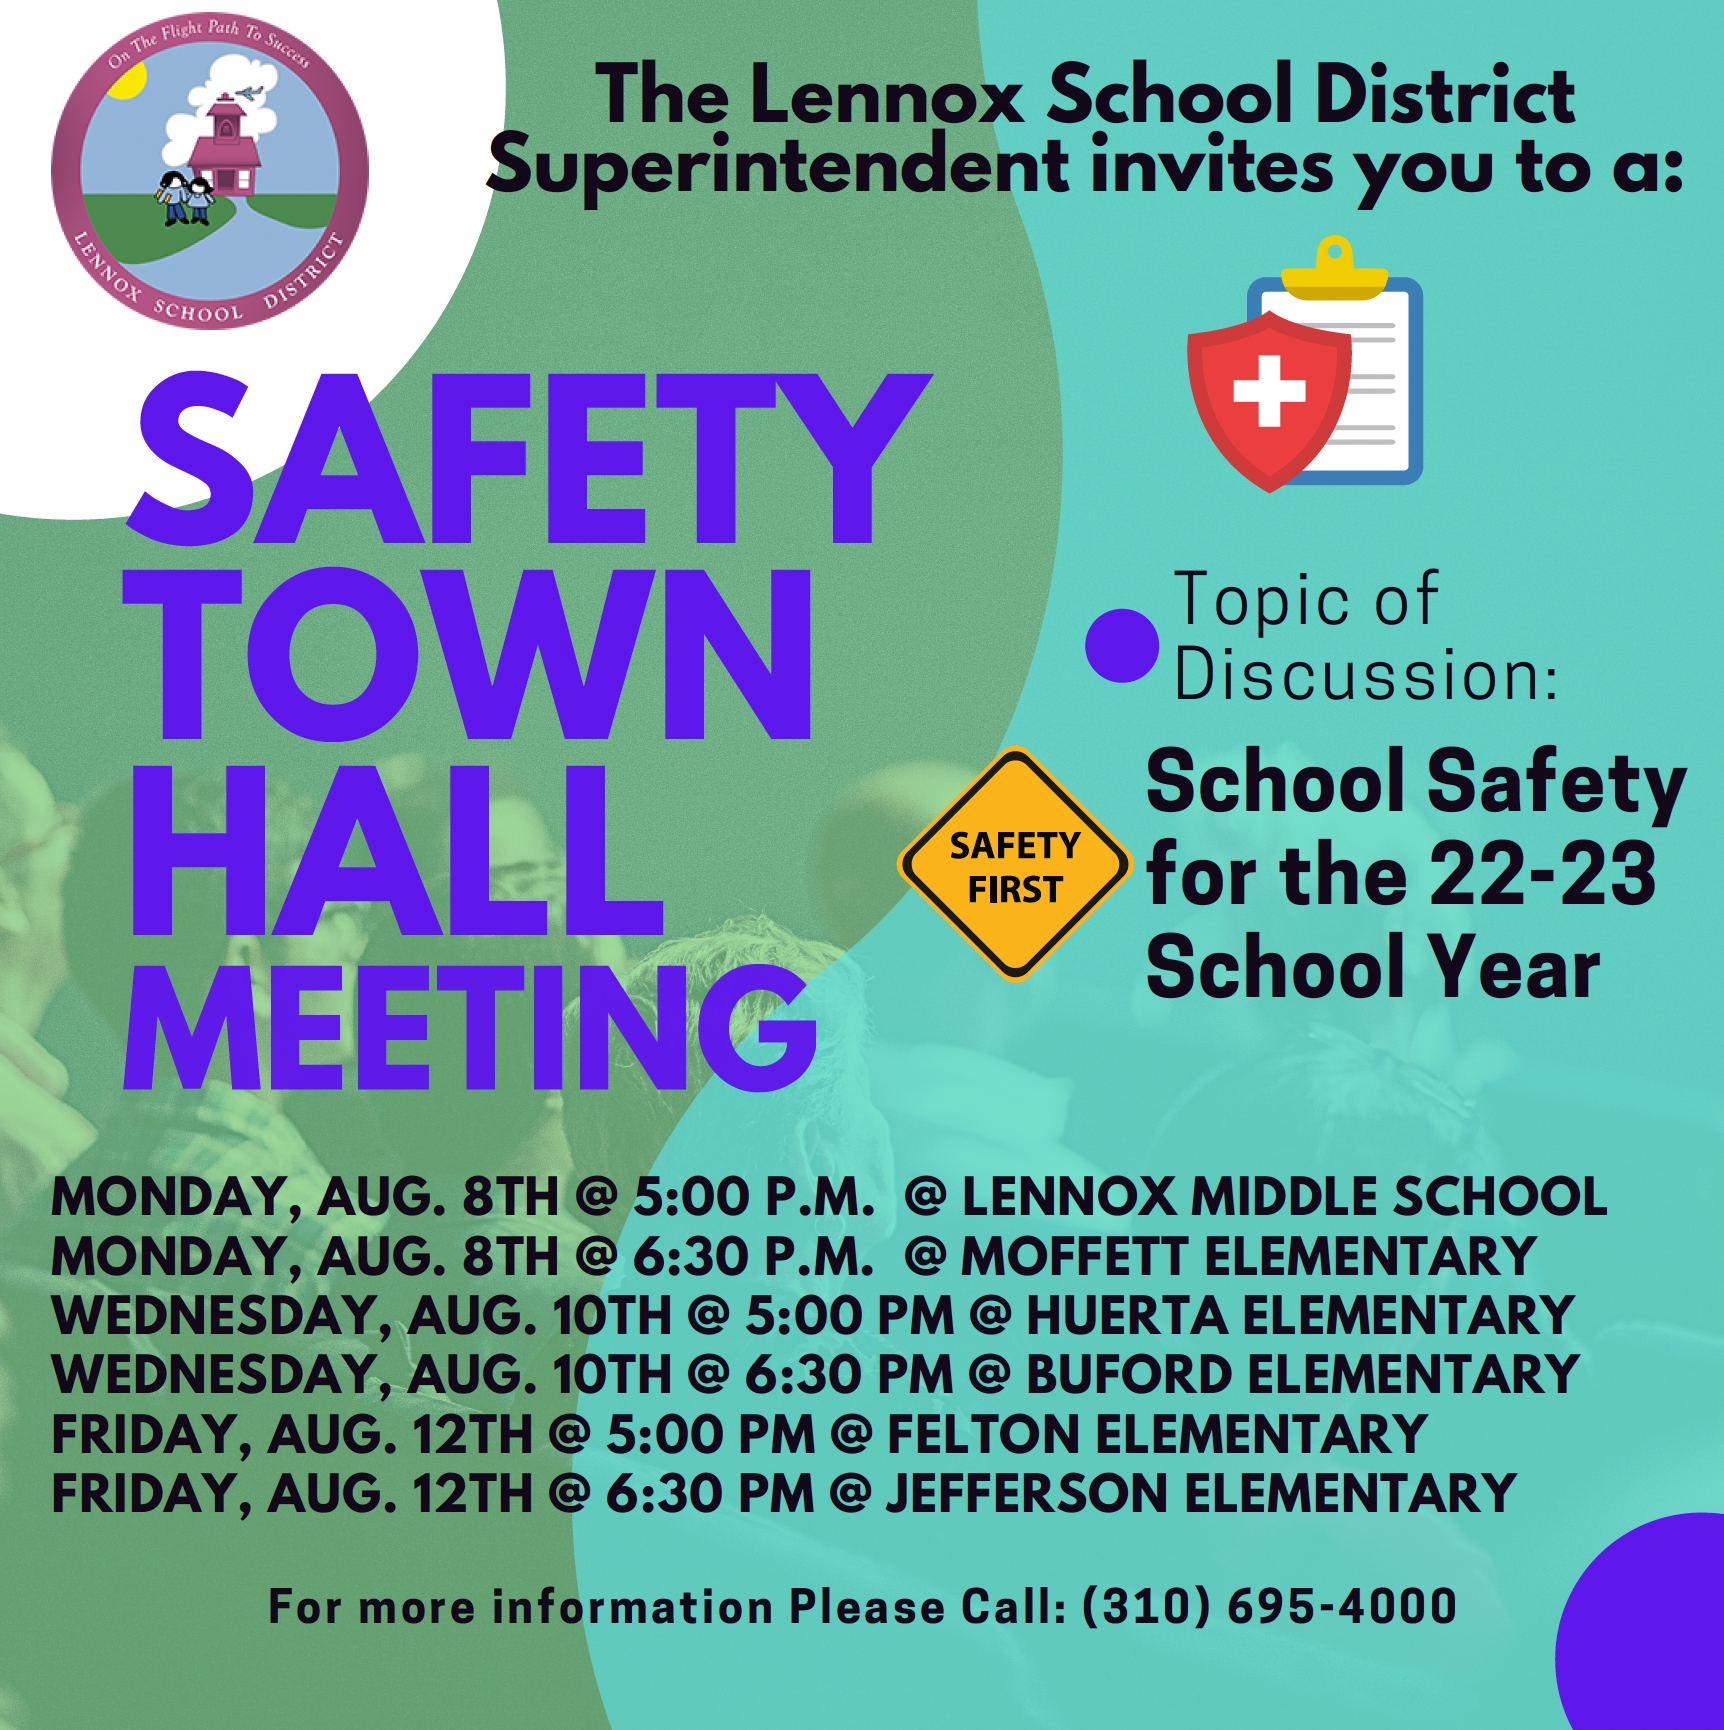 Safety meeting flyer